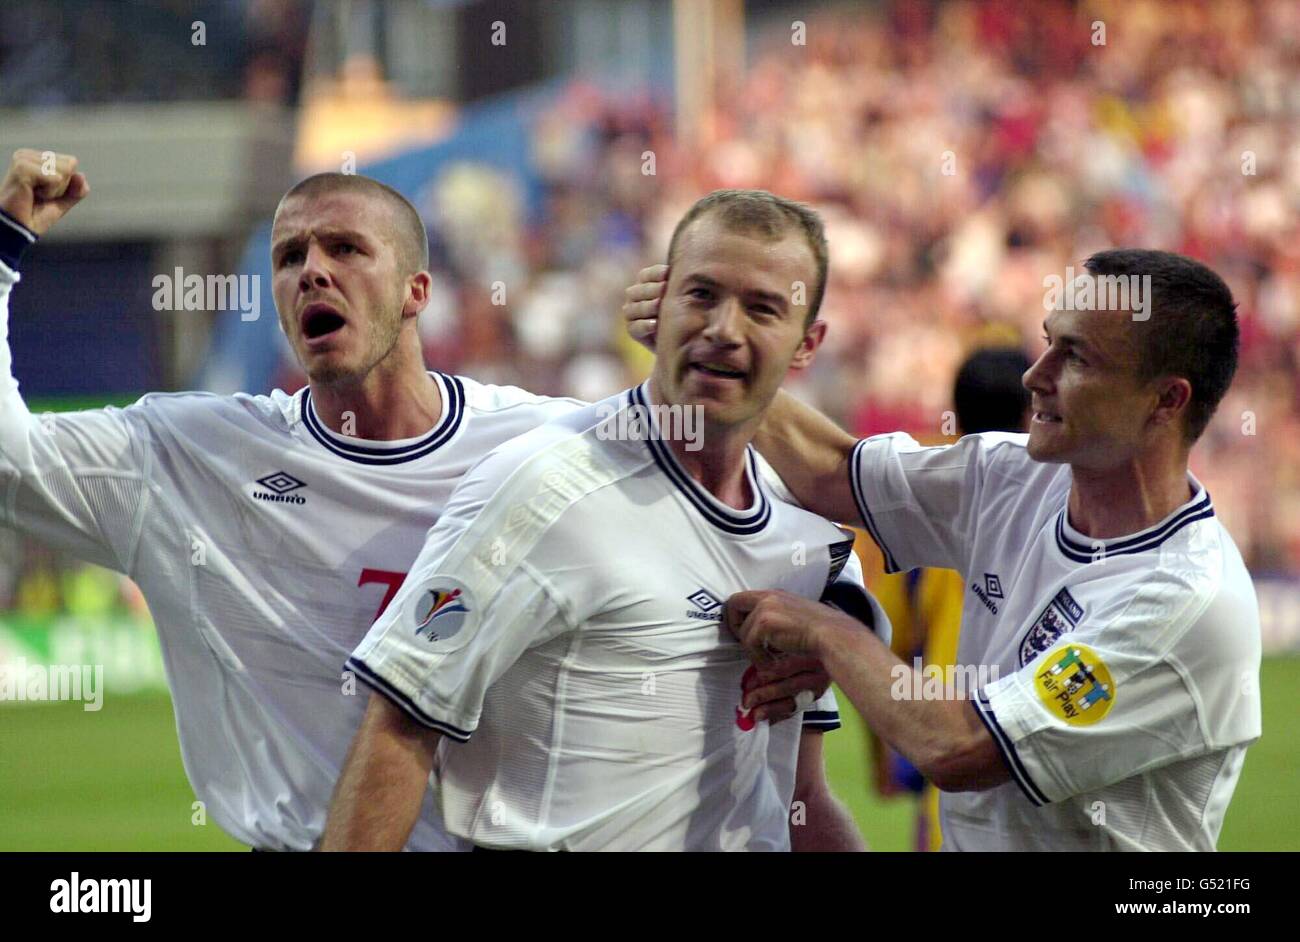 England captain Alan Shearer (C) is congratulated by teammates David Beckham (L) and Dennis Wise after scoring from the penalty spot during the Euro 2000 game against Romania in Charleroi. Stock Photo